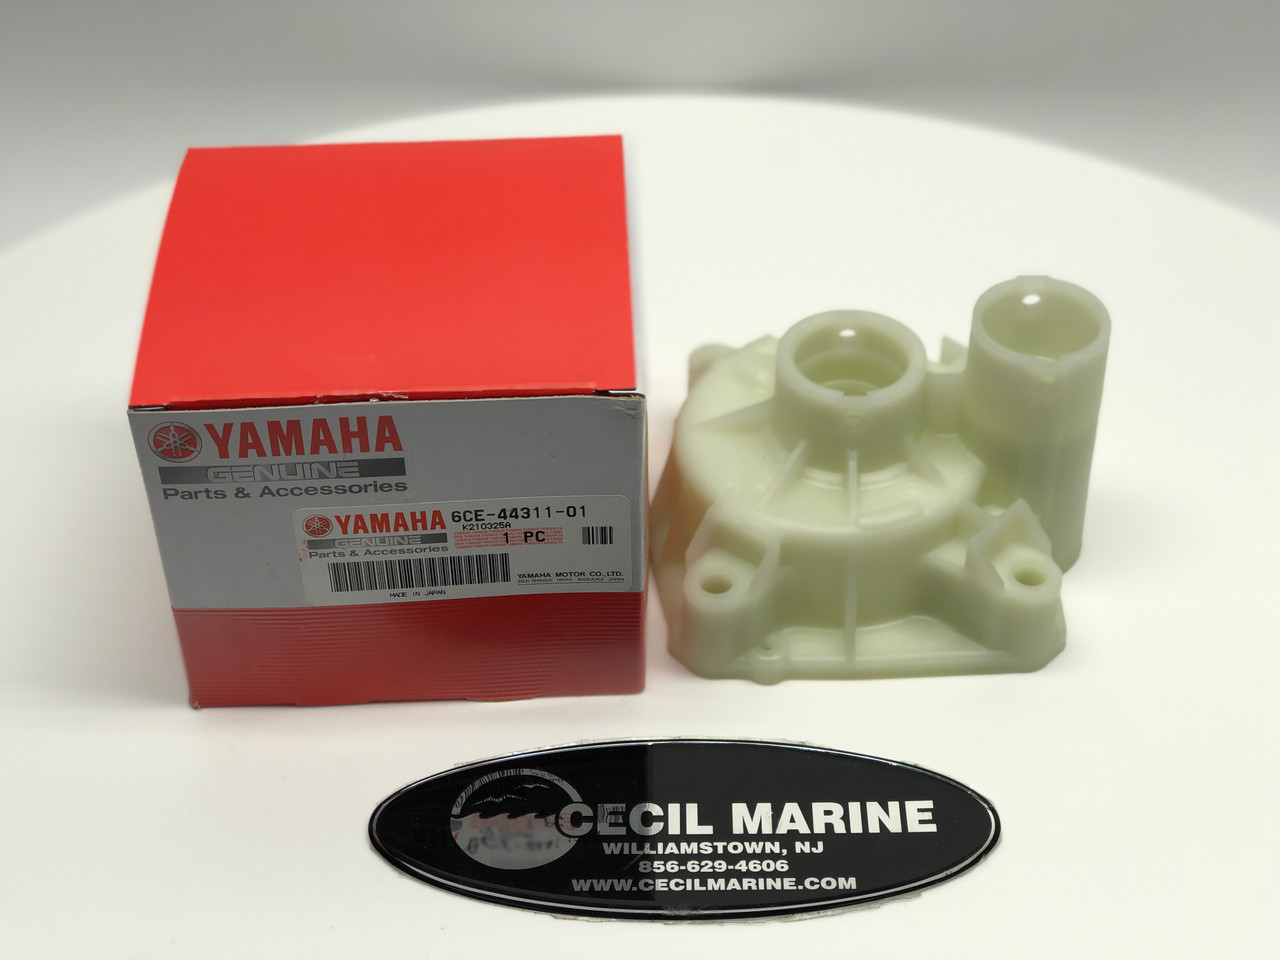 $19.99* GENUINE YAMAHA no tax* WATER PUMP HOUSING 6CE-44311-01-00 *In Stock & Ready To Ship!